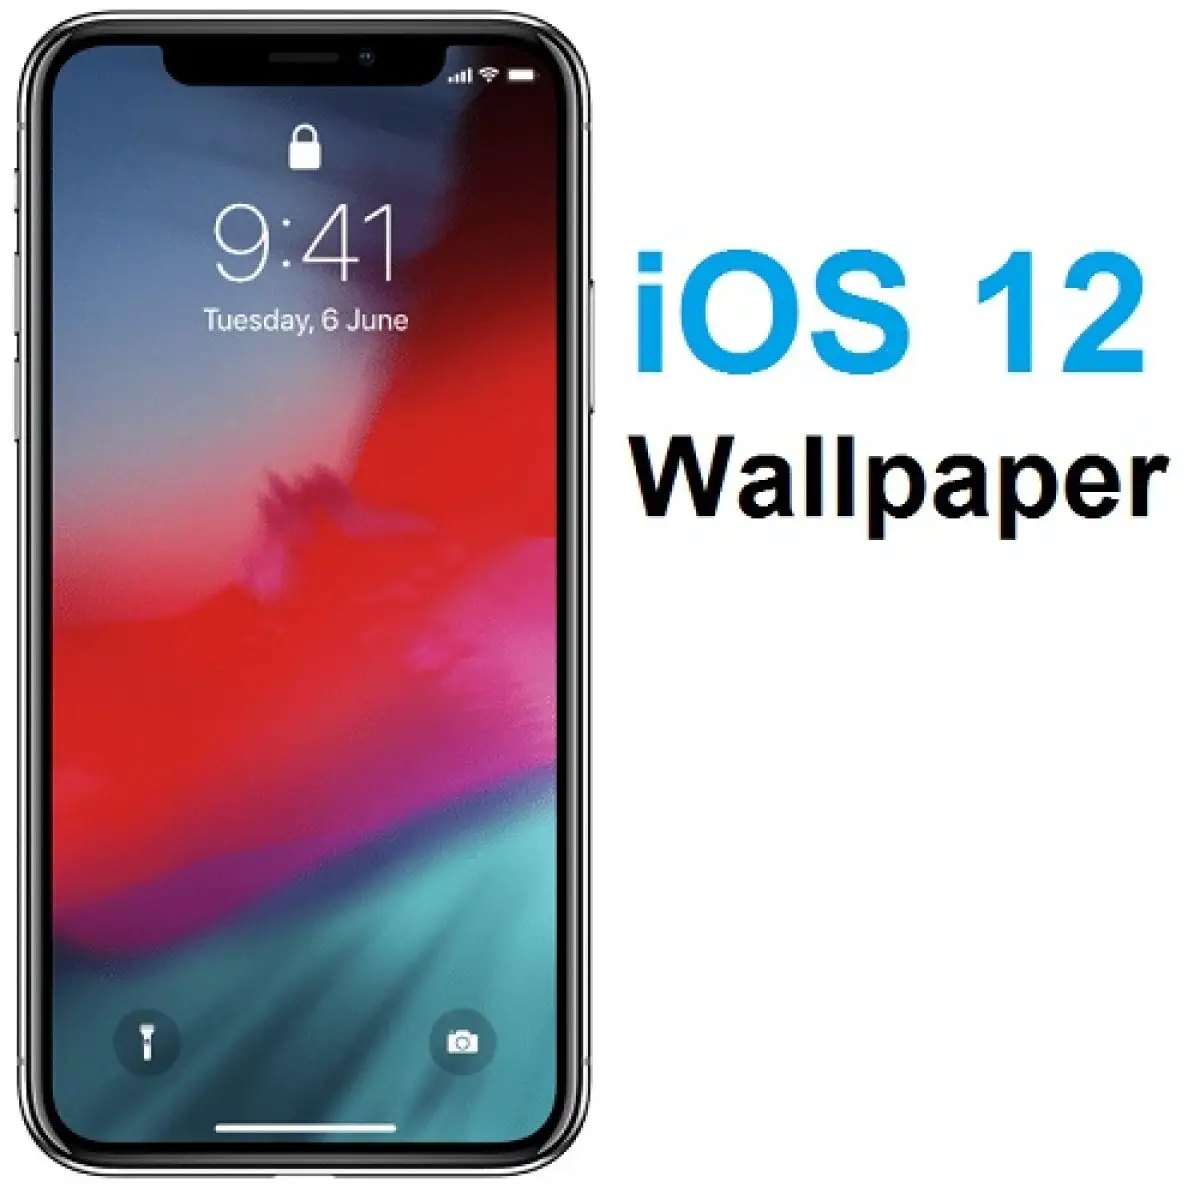 Download The New Default Ios 12 Wallpaper For Iphone Ipad And Mac